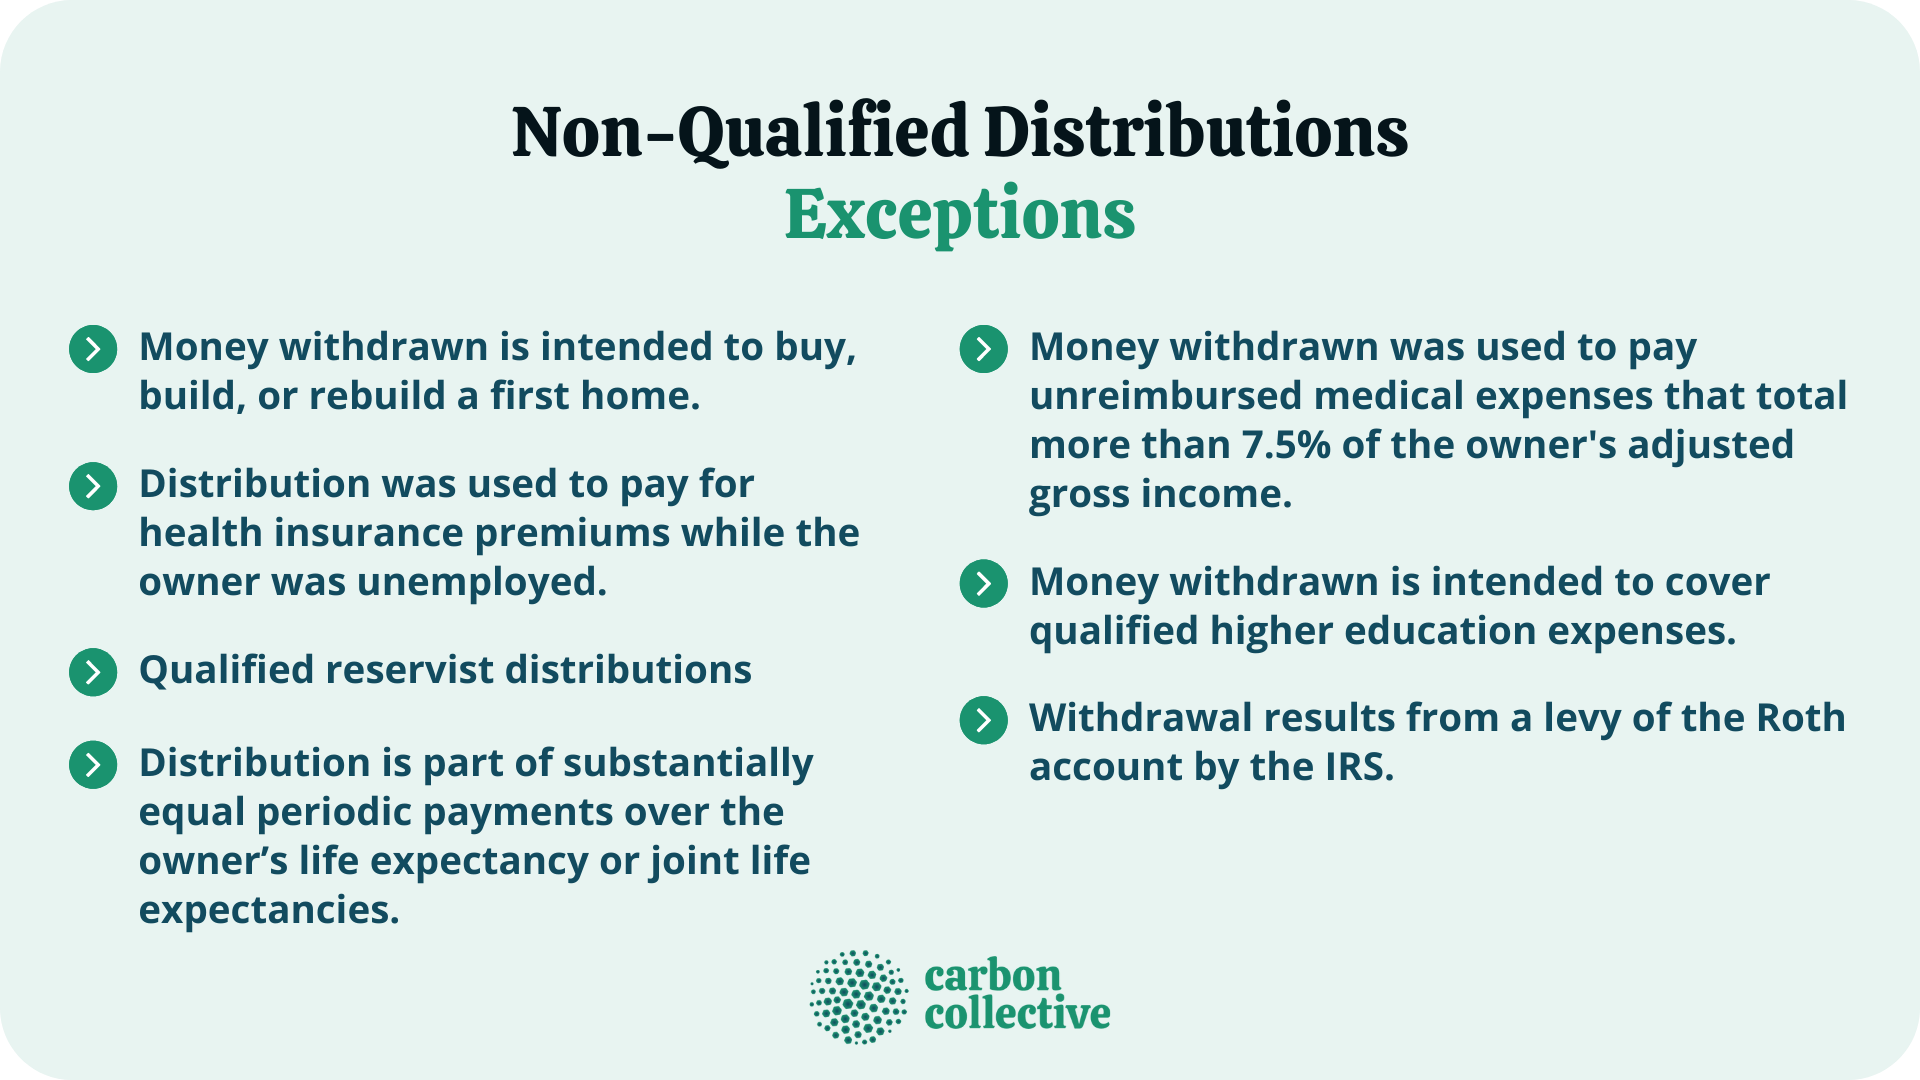 Non-Qualified_Distributions_Exceptions (1)